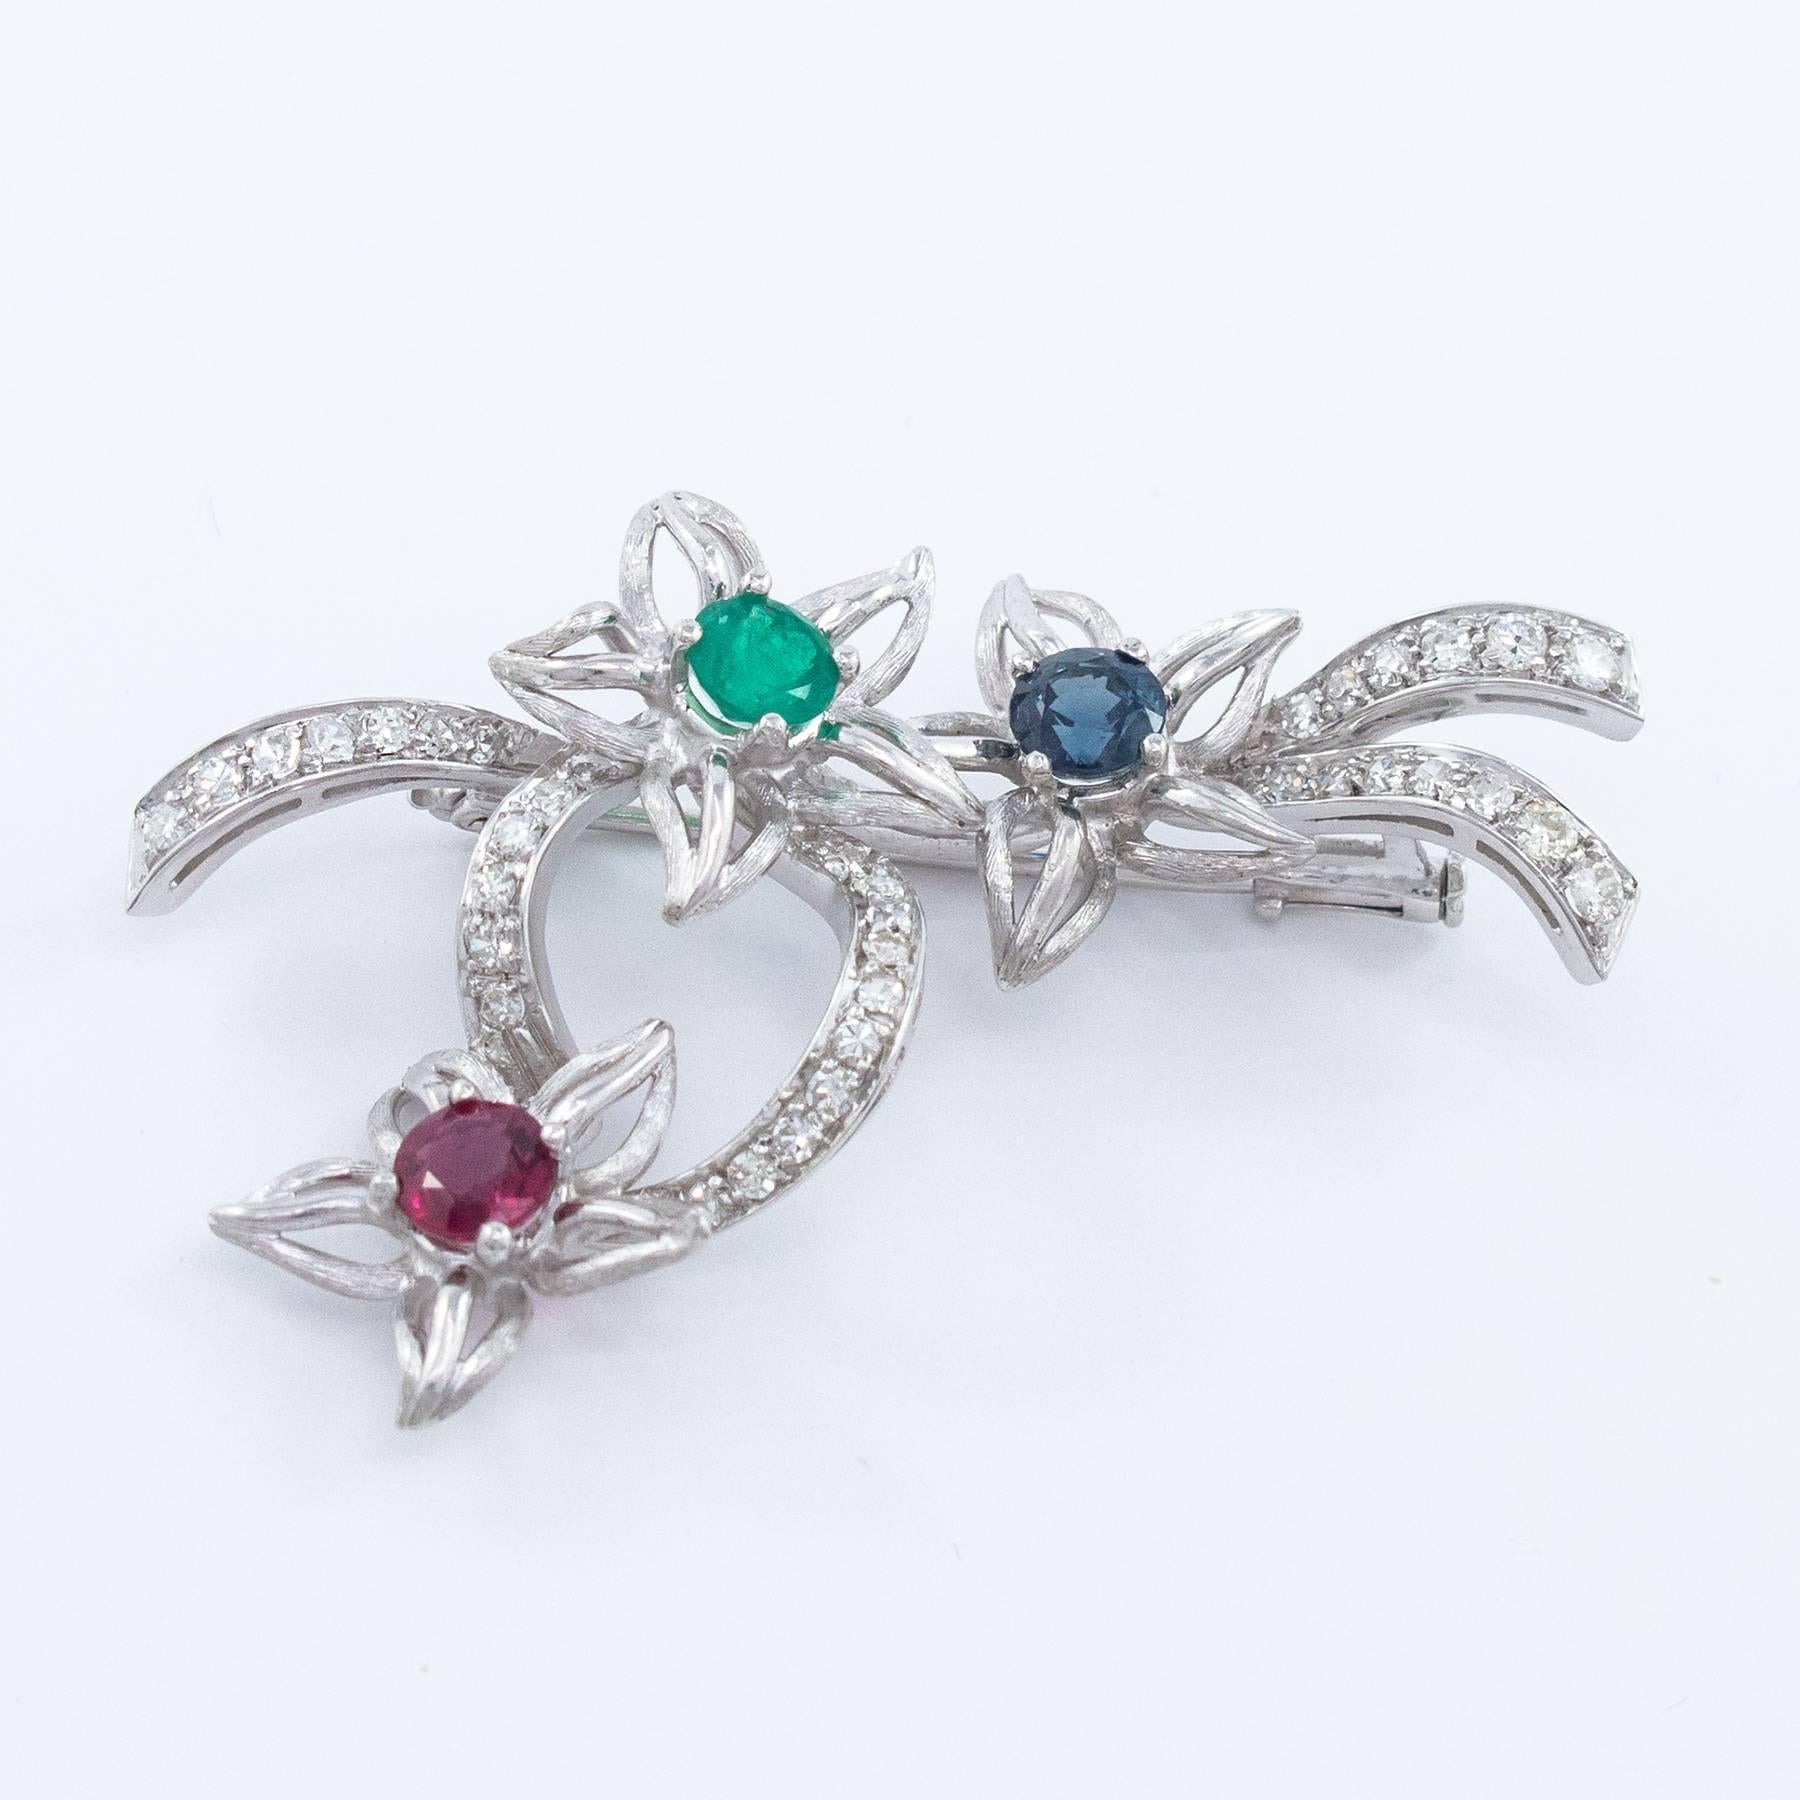 Diamond, Emerald, Ruby and Blue Sapphire Brooch set in Platinum In Excellent Condition For Sale In Toronto, Ontario